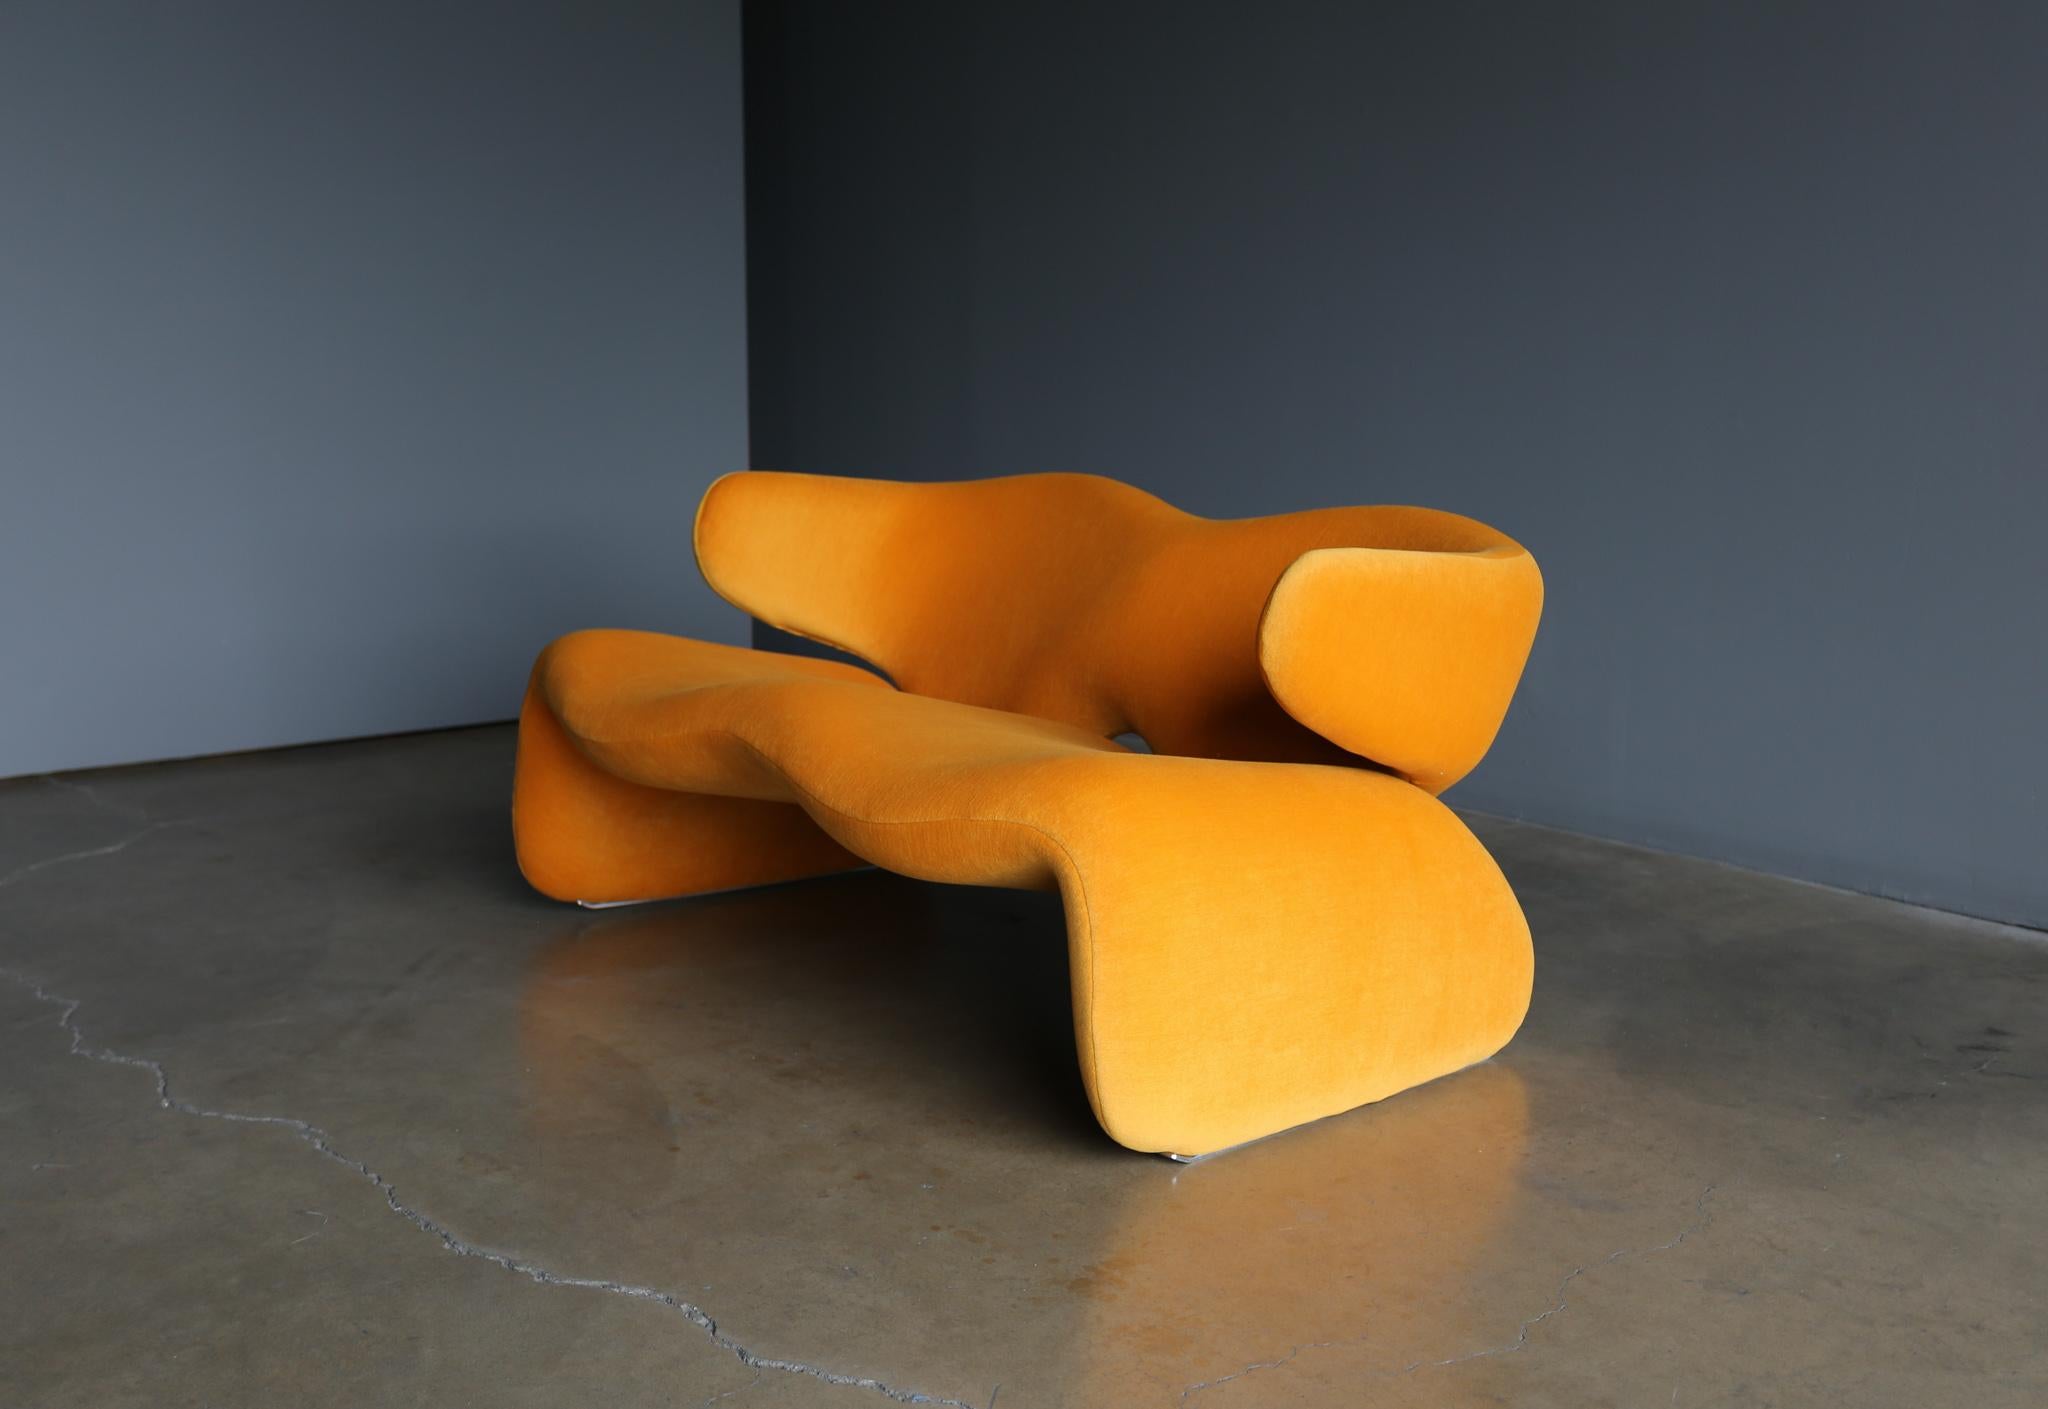 Steel Olivier Mourgue “Djinn” Settee for Airborne, Circa 1964